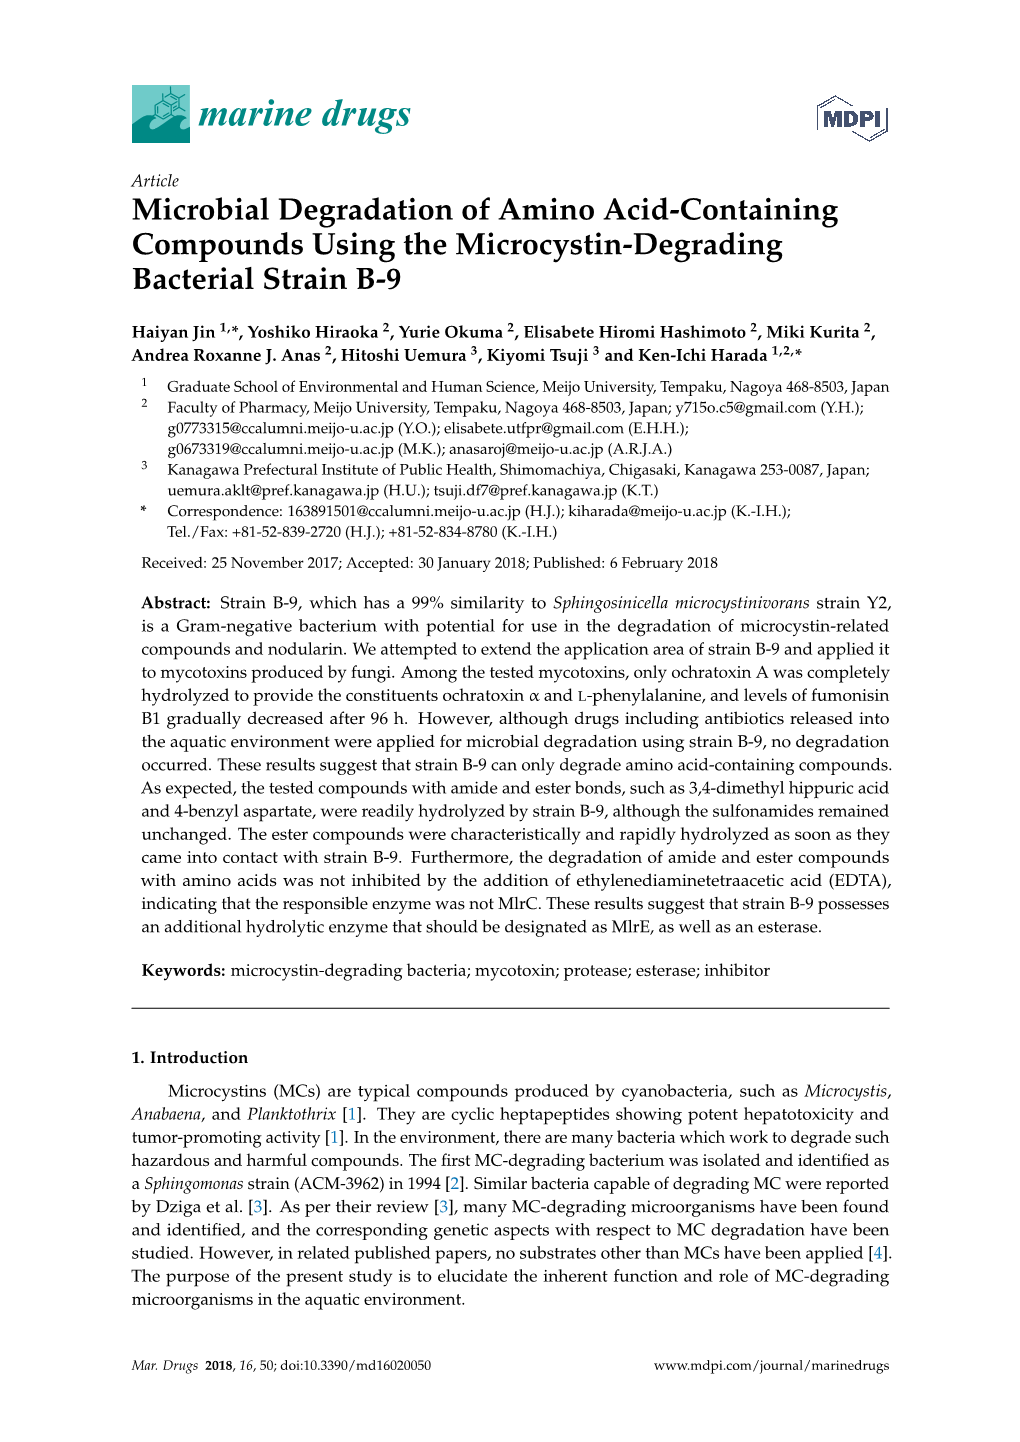 Microbial Degradation of Amino Acid-Containing Compounds Using the Microcystin-Degrading Bacterial Strain B-9